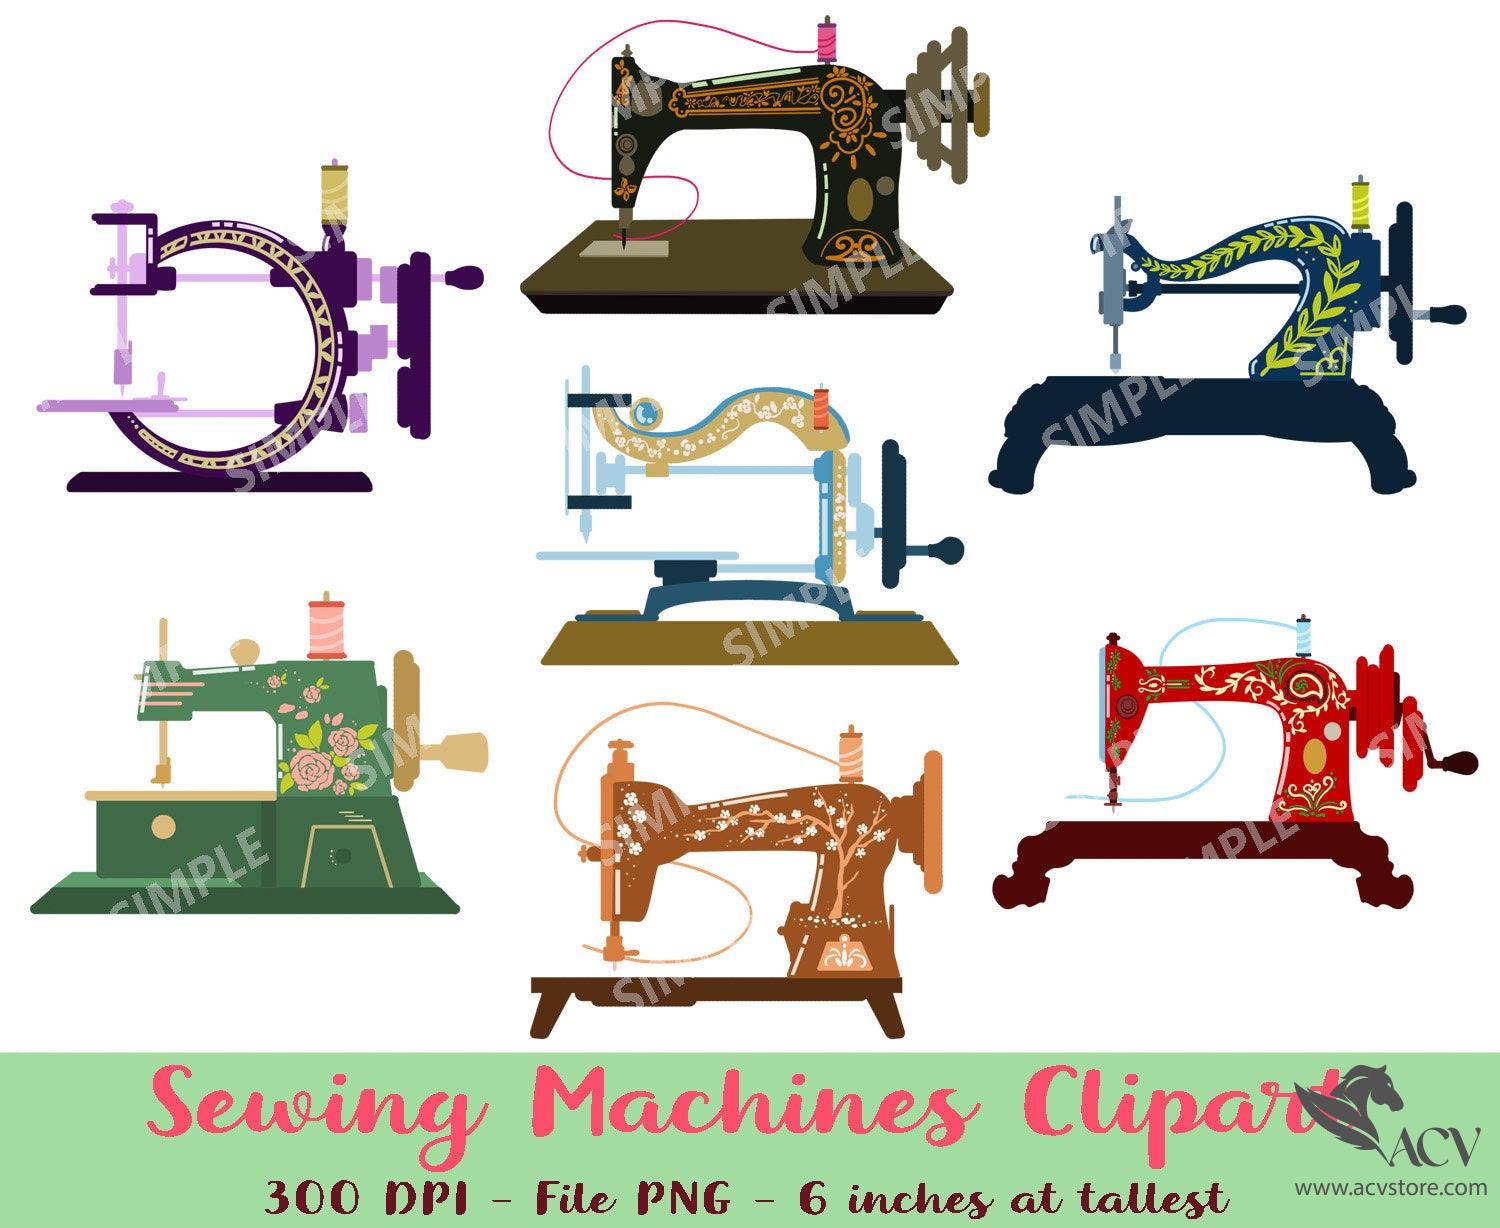 Sewing Machines Clipart, Sewing Machines vintage, Hand painted images, black silhouettes, diy logo, invite, boho, stitching, needlework | PESE_01